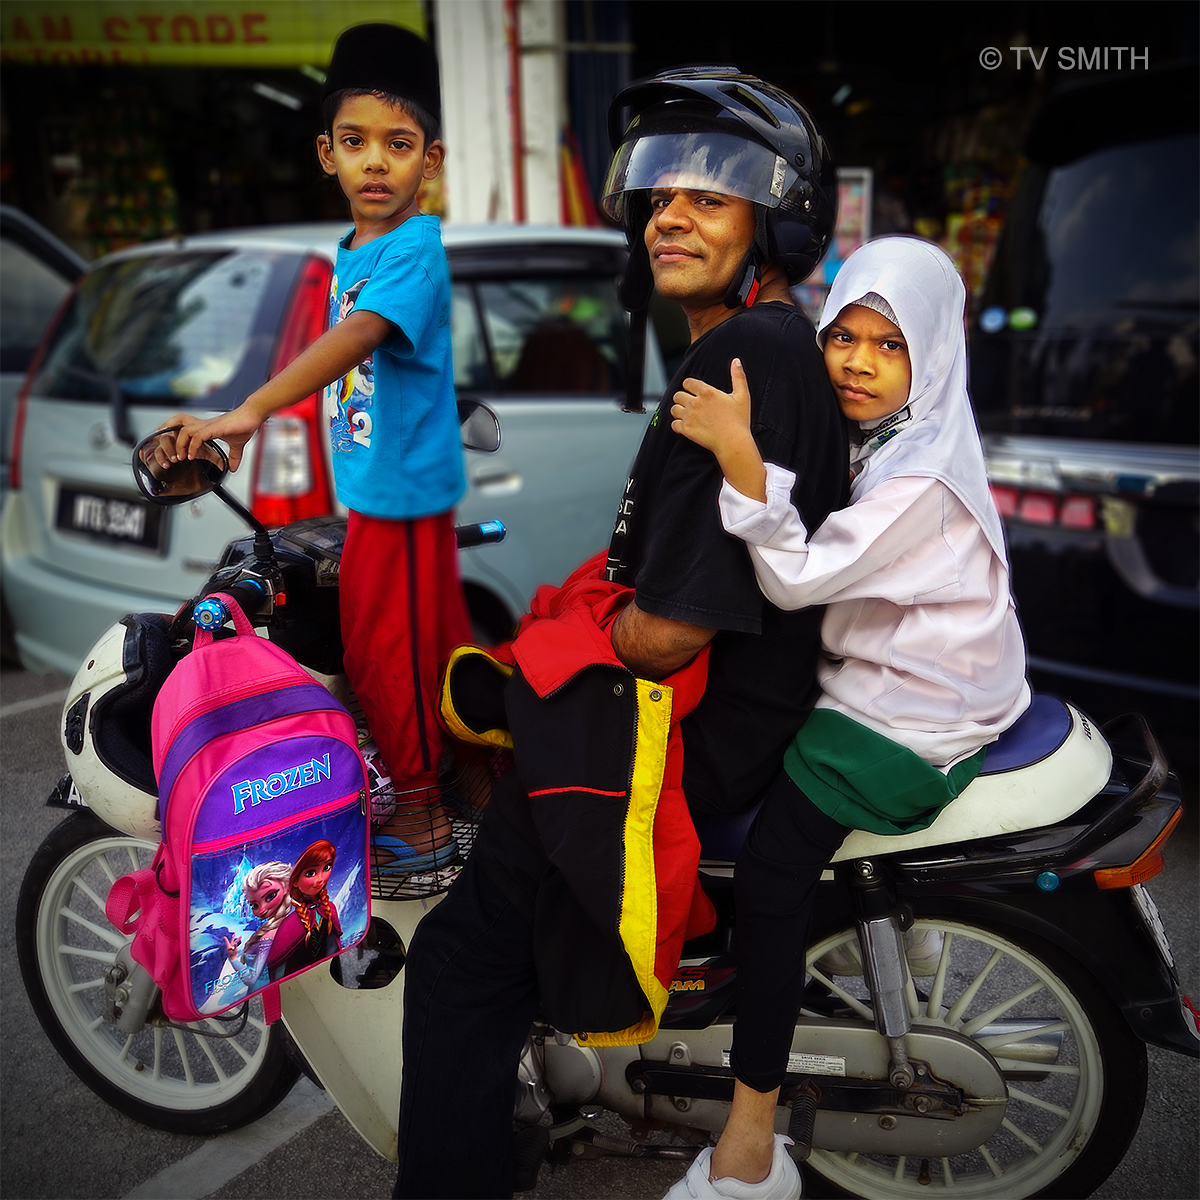 A family on a motorcycle